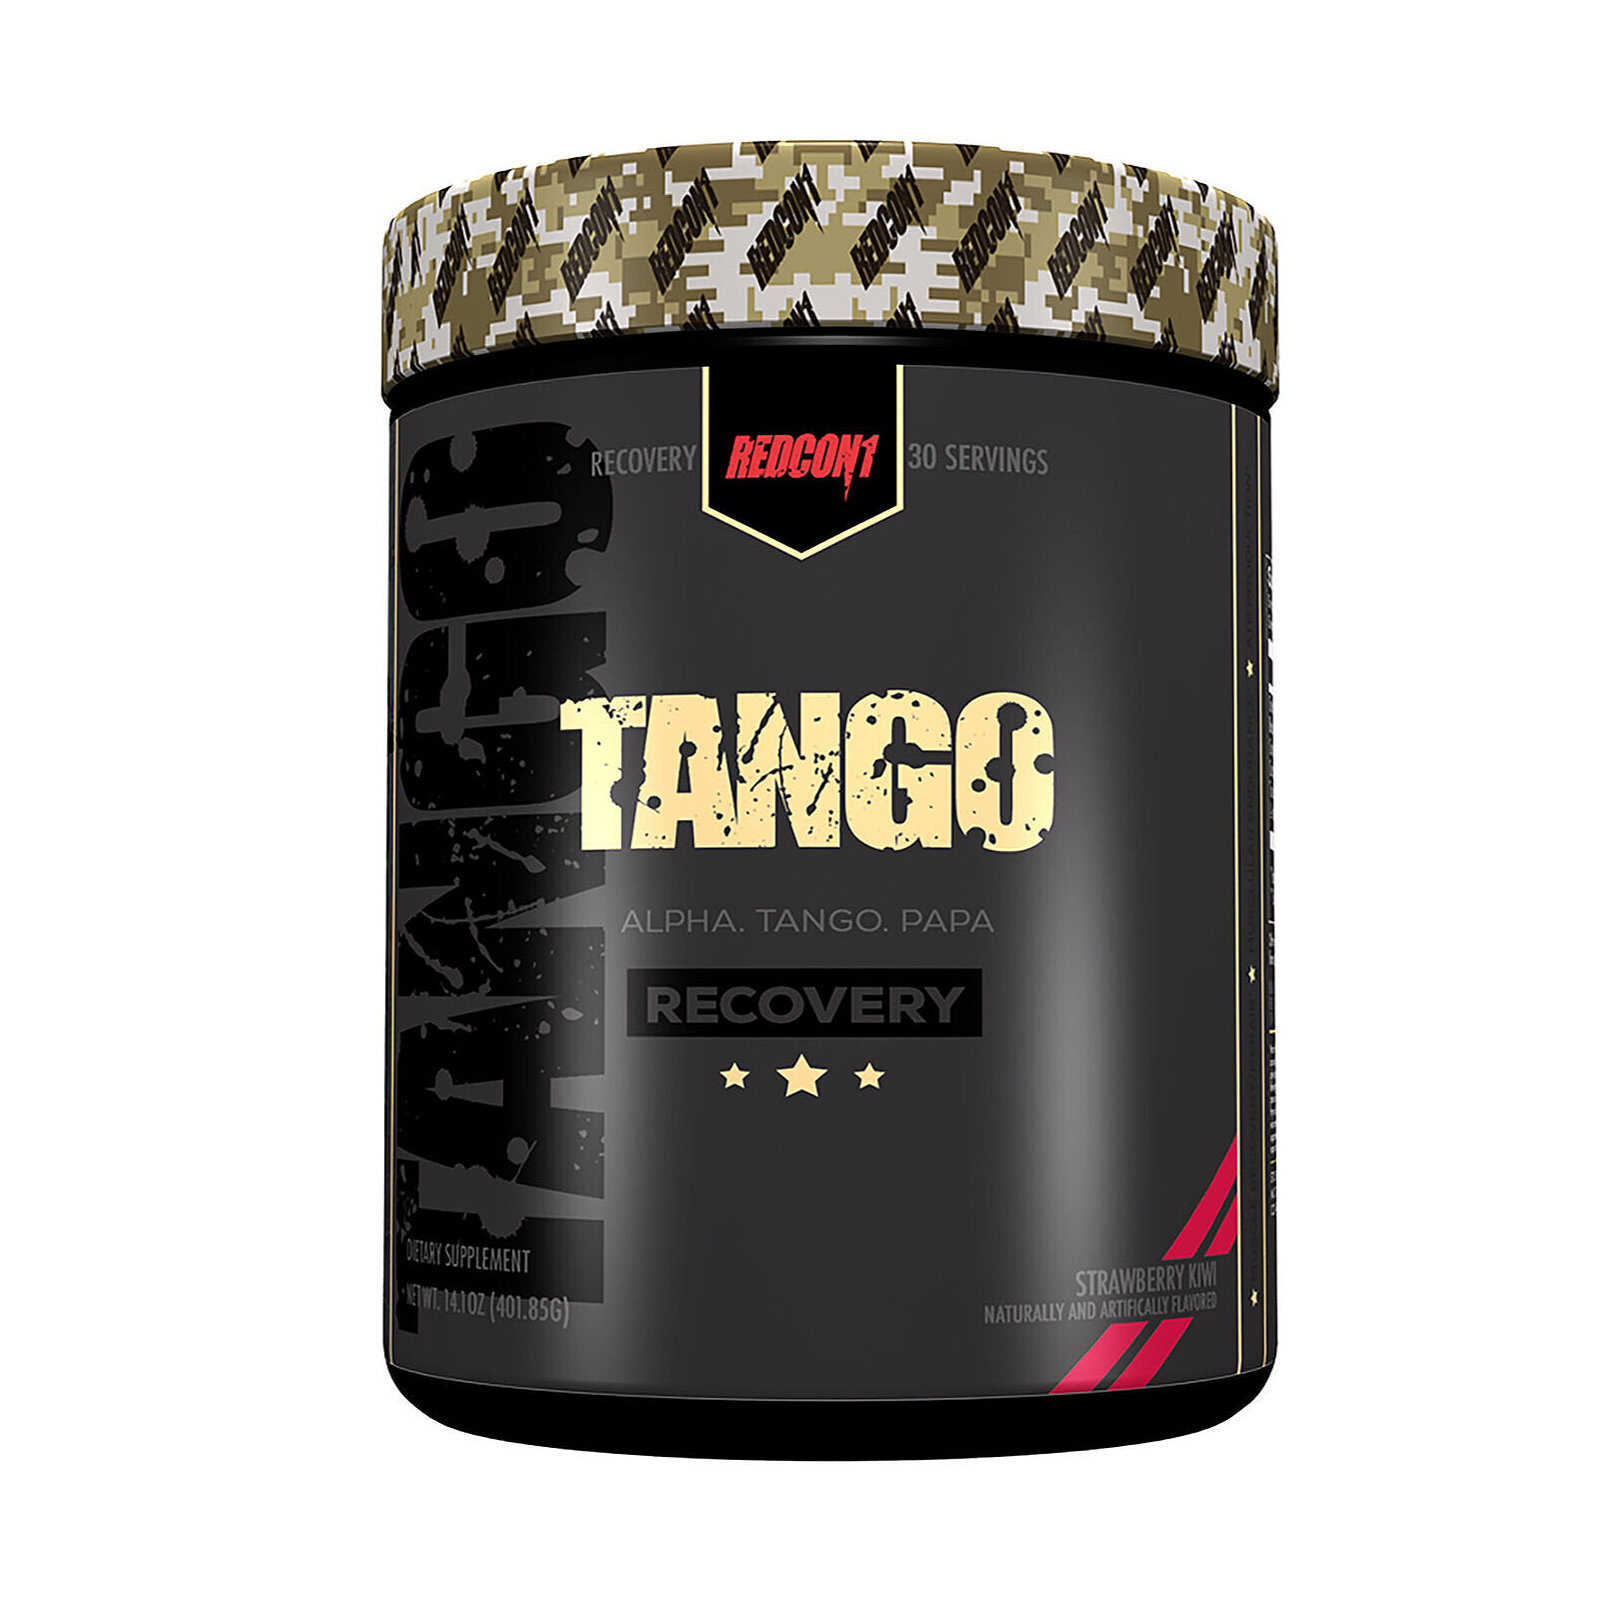 REDCON1 TANGO 30 Servings CREATINE MATRIX Promotes Muscular Strength & Recovery 